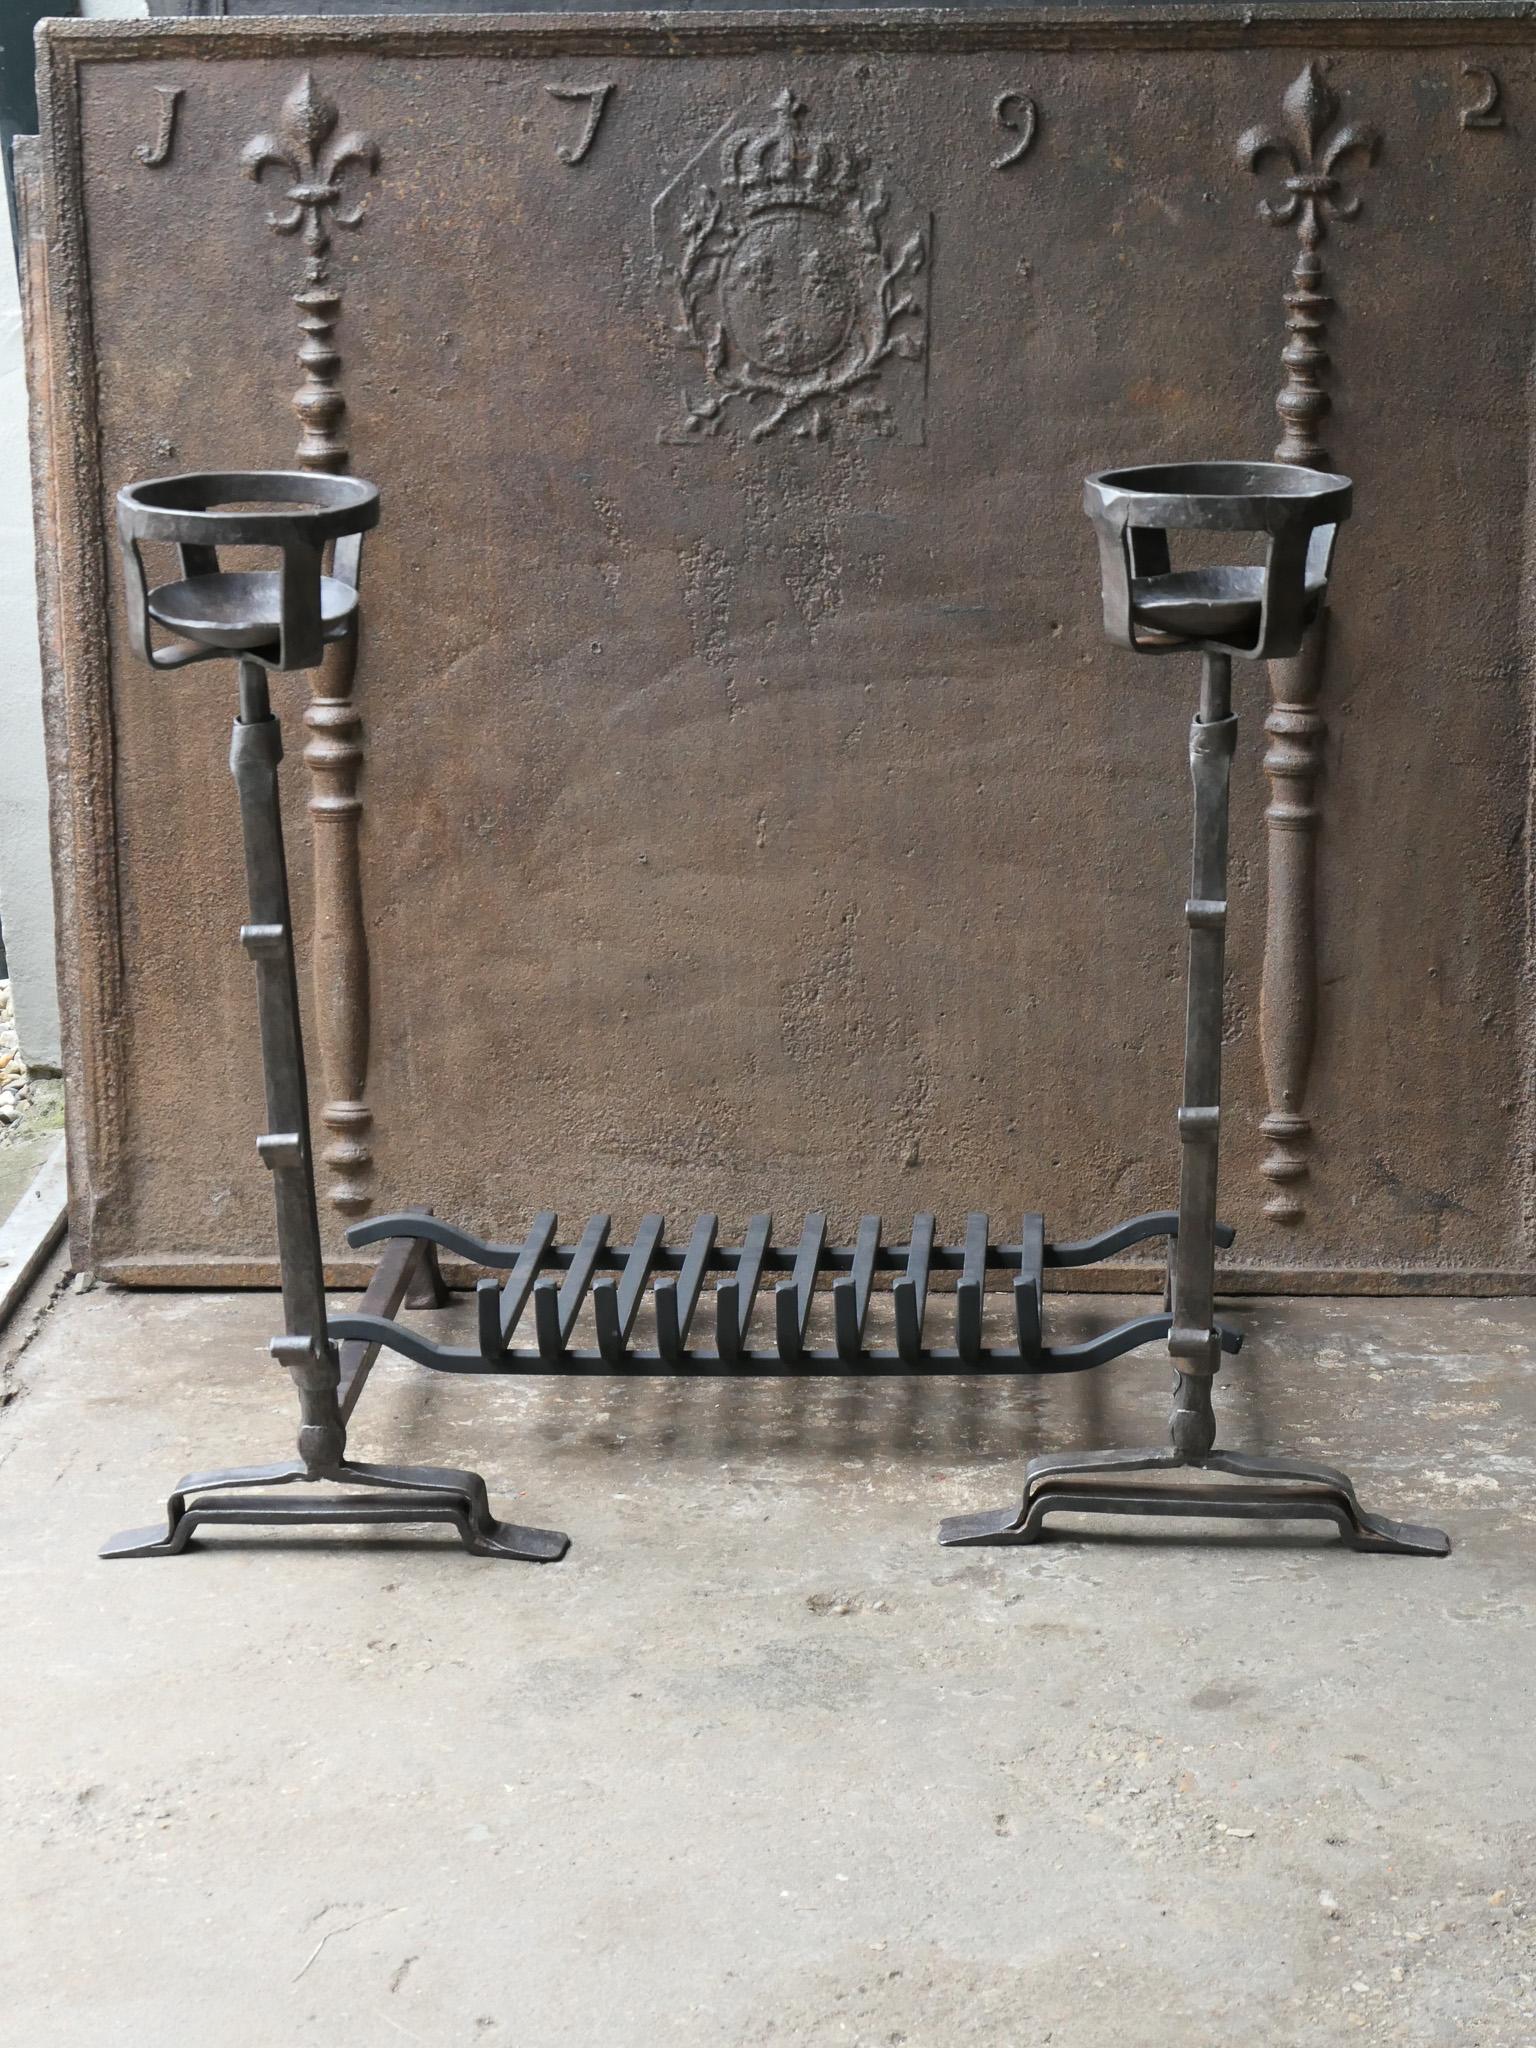 17th - 18th century French Gothic fire grate with period andirons and a recently forged grate. Made of wrought iron. The condition is good. 

The total width at the front of the grate is 88 cm / 34.6 inches.







